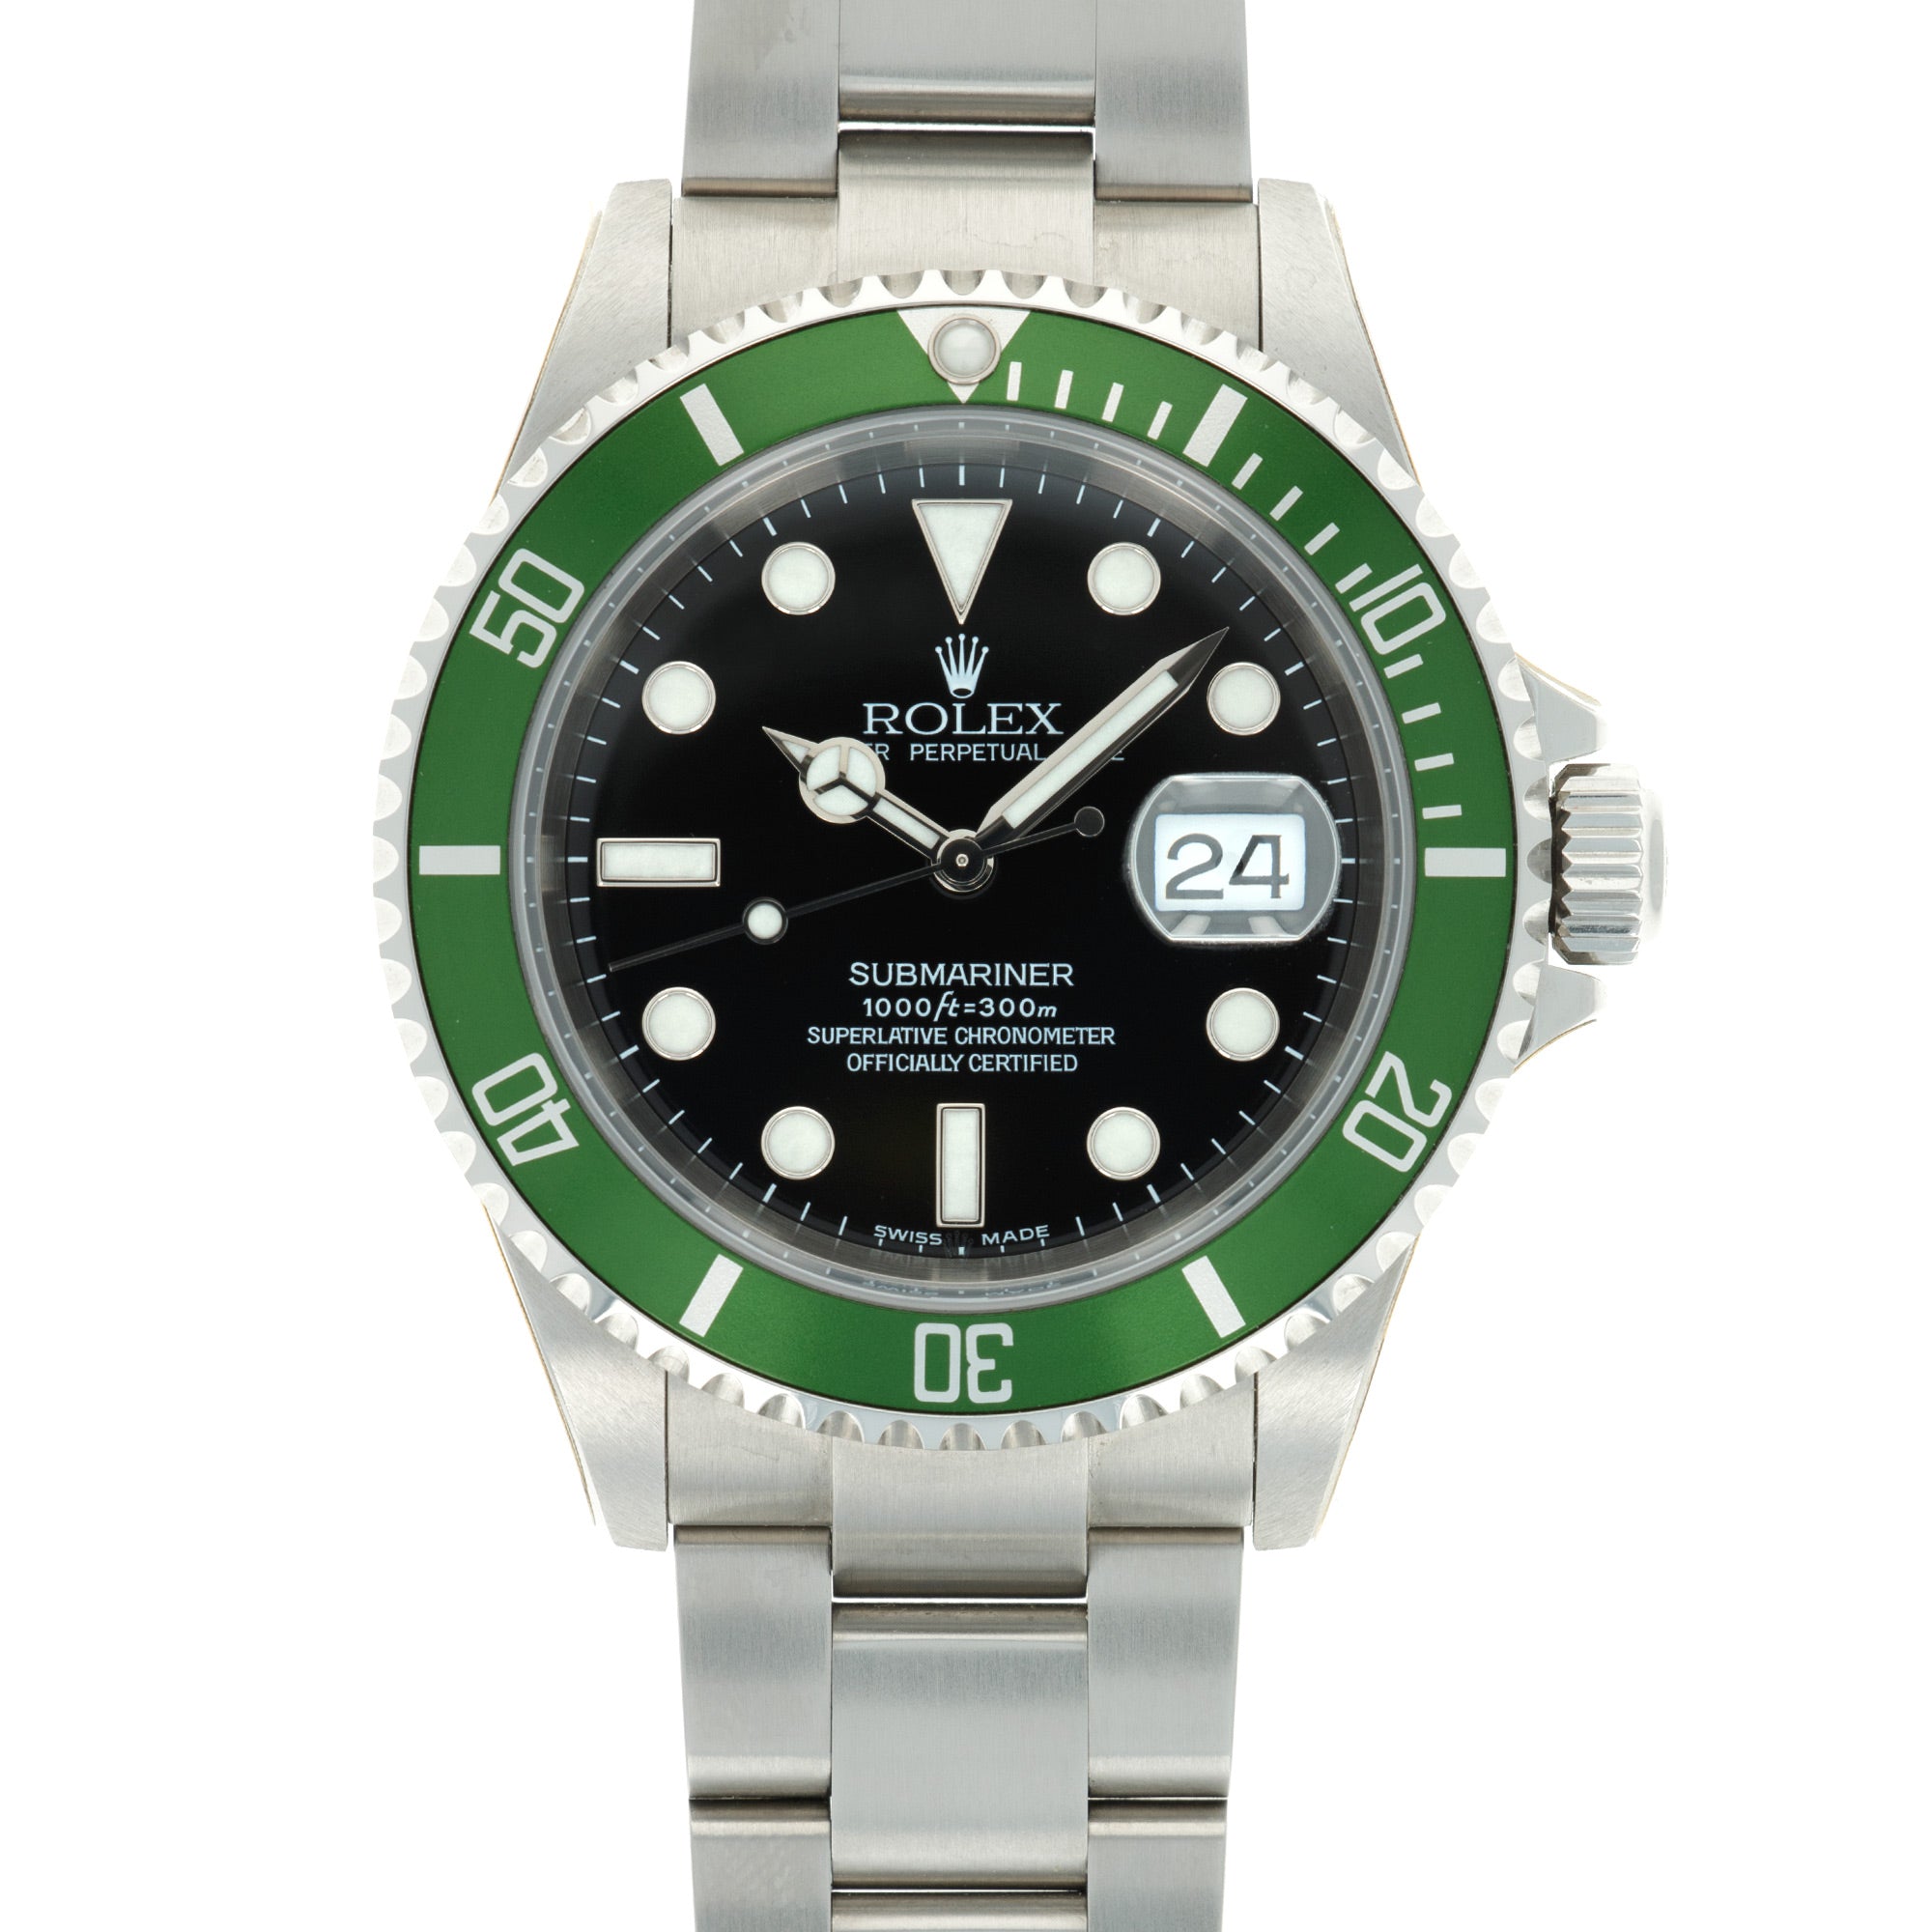 Rolex - Rolex Anniversary Flat Four Submariner Ref. 16610, with Original Box and Papers New Old Stock - The Keystone Watches